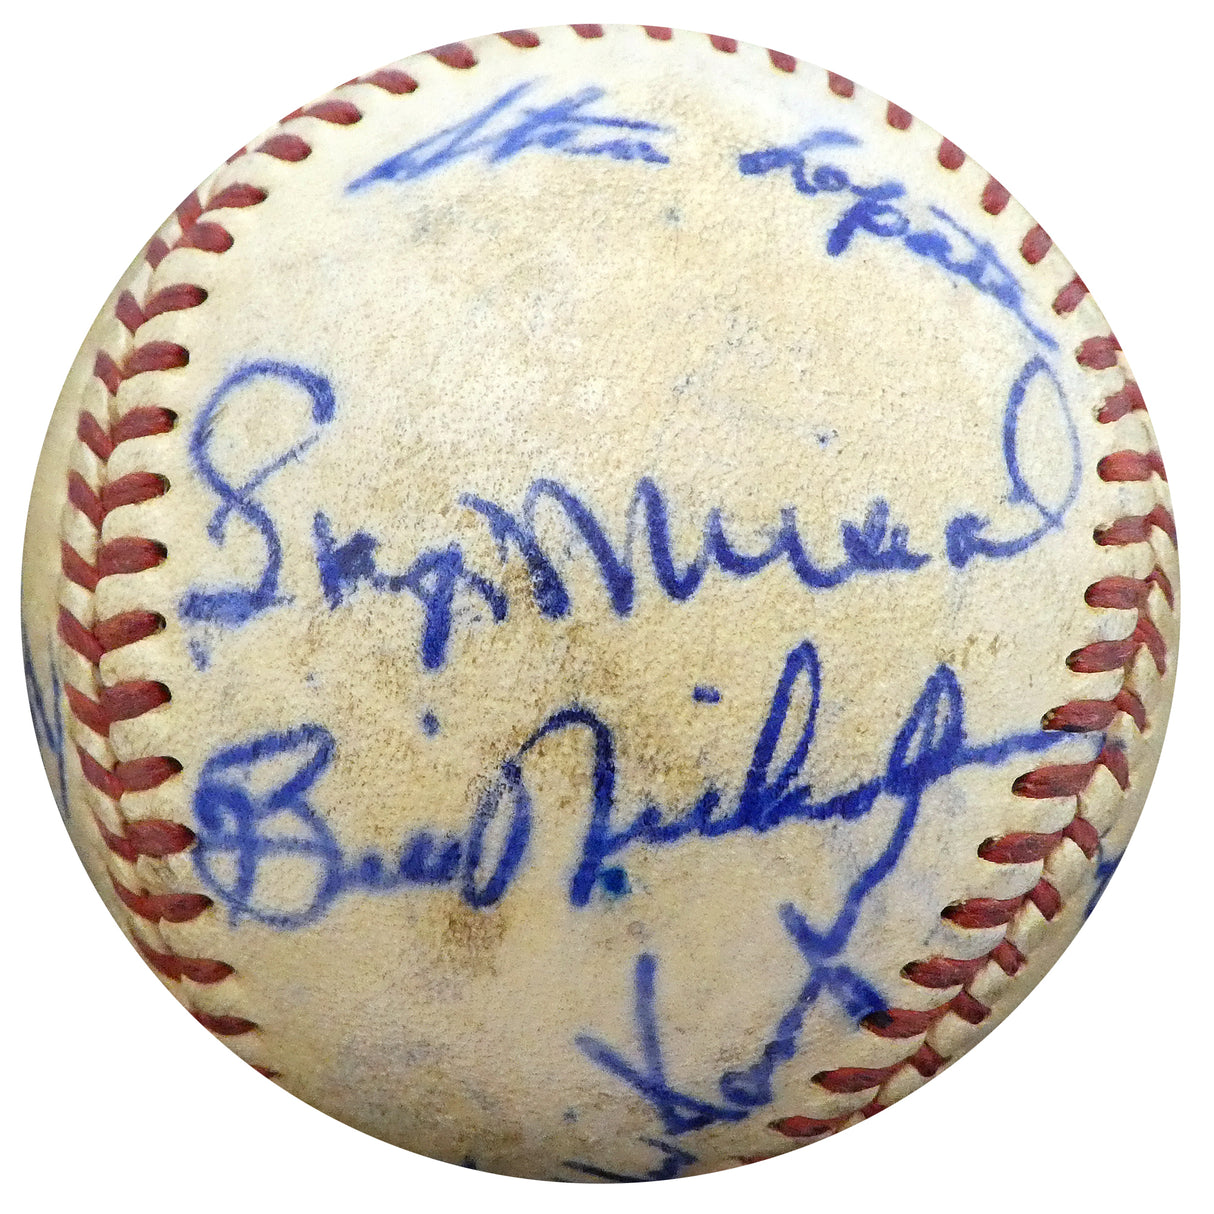 1950 St. Louis Cardinals & Philadelphia Phillies Autographed Official Baseball With 19 Total Signatures Including Stan Musial & Enos Slaughter Beckett BAS #A52636